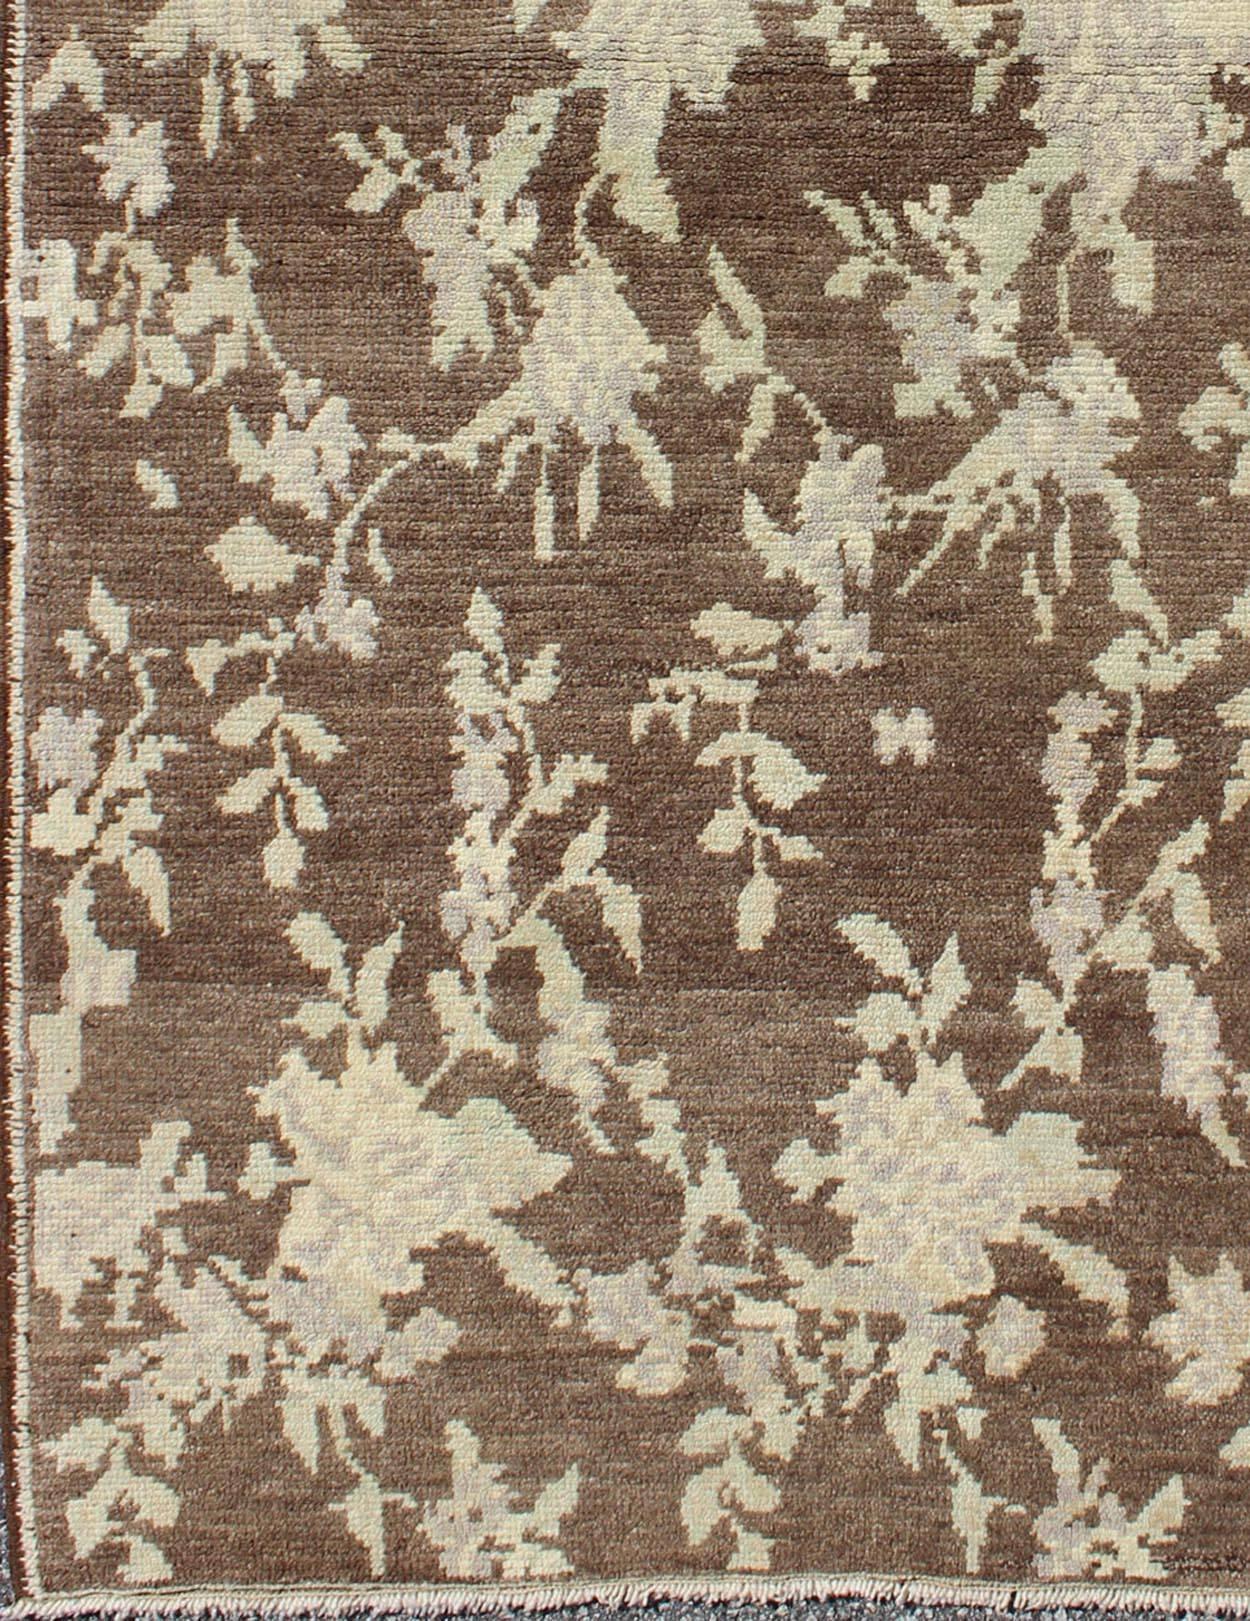 Mocha vintage Turkish Oushak rug with free-flowing green and cream flower blossoms, rug en-112392, country of origin / type: Turkey / Oushak, circa 1940

Set on a mocha brown field with an all-over pattern, this beautiful midcentury Turkish Oushak